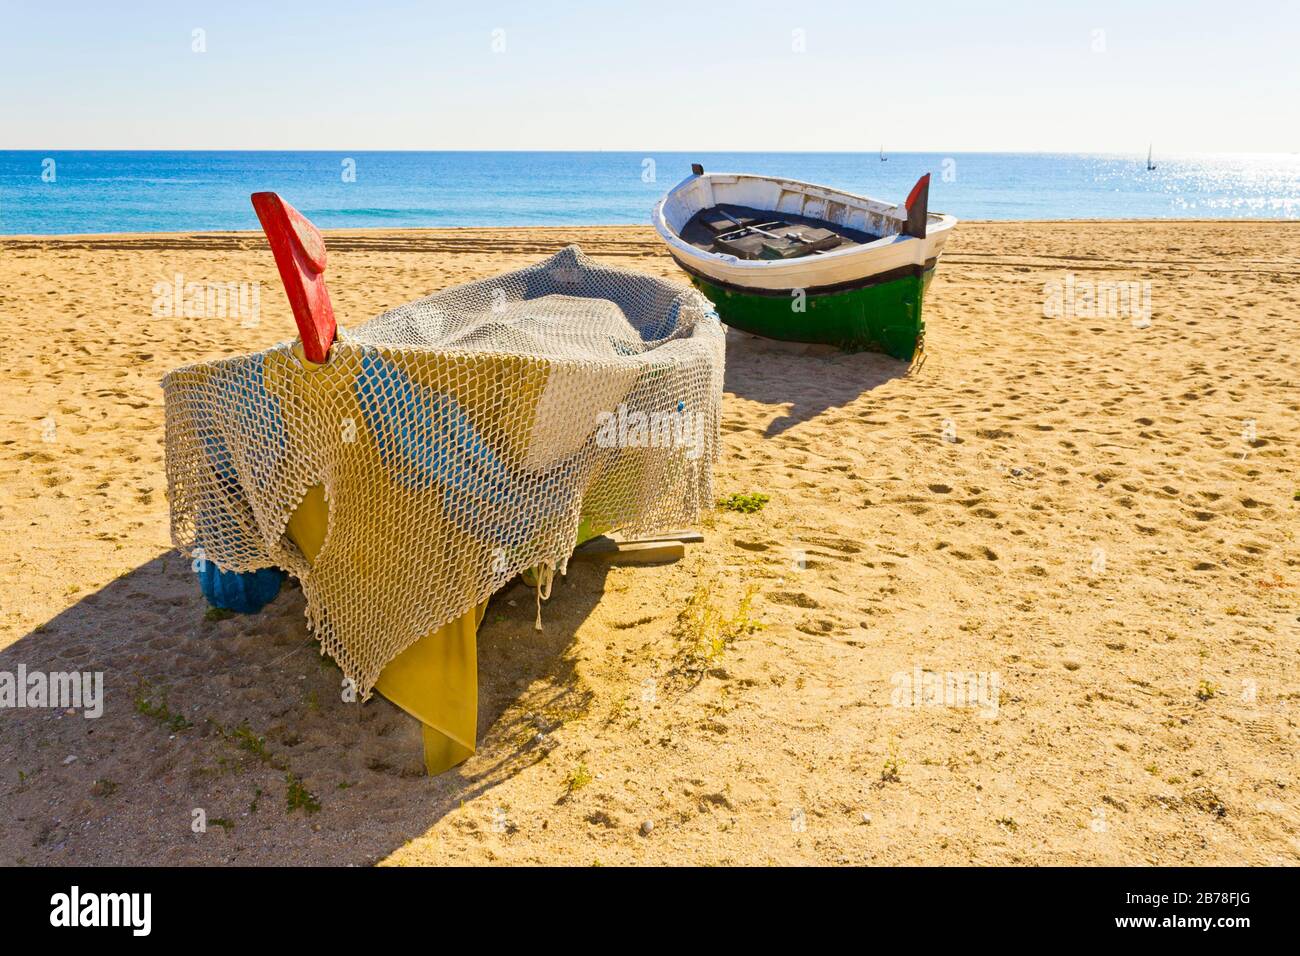 Colourful old fishing boats aground on Badalona beach in the Mediterranean Sea in a sunny day. Barcelona, Catalunya, Spain. Stock Photo